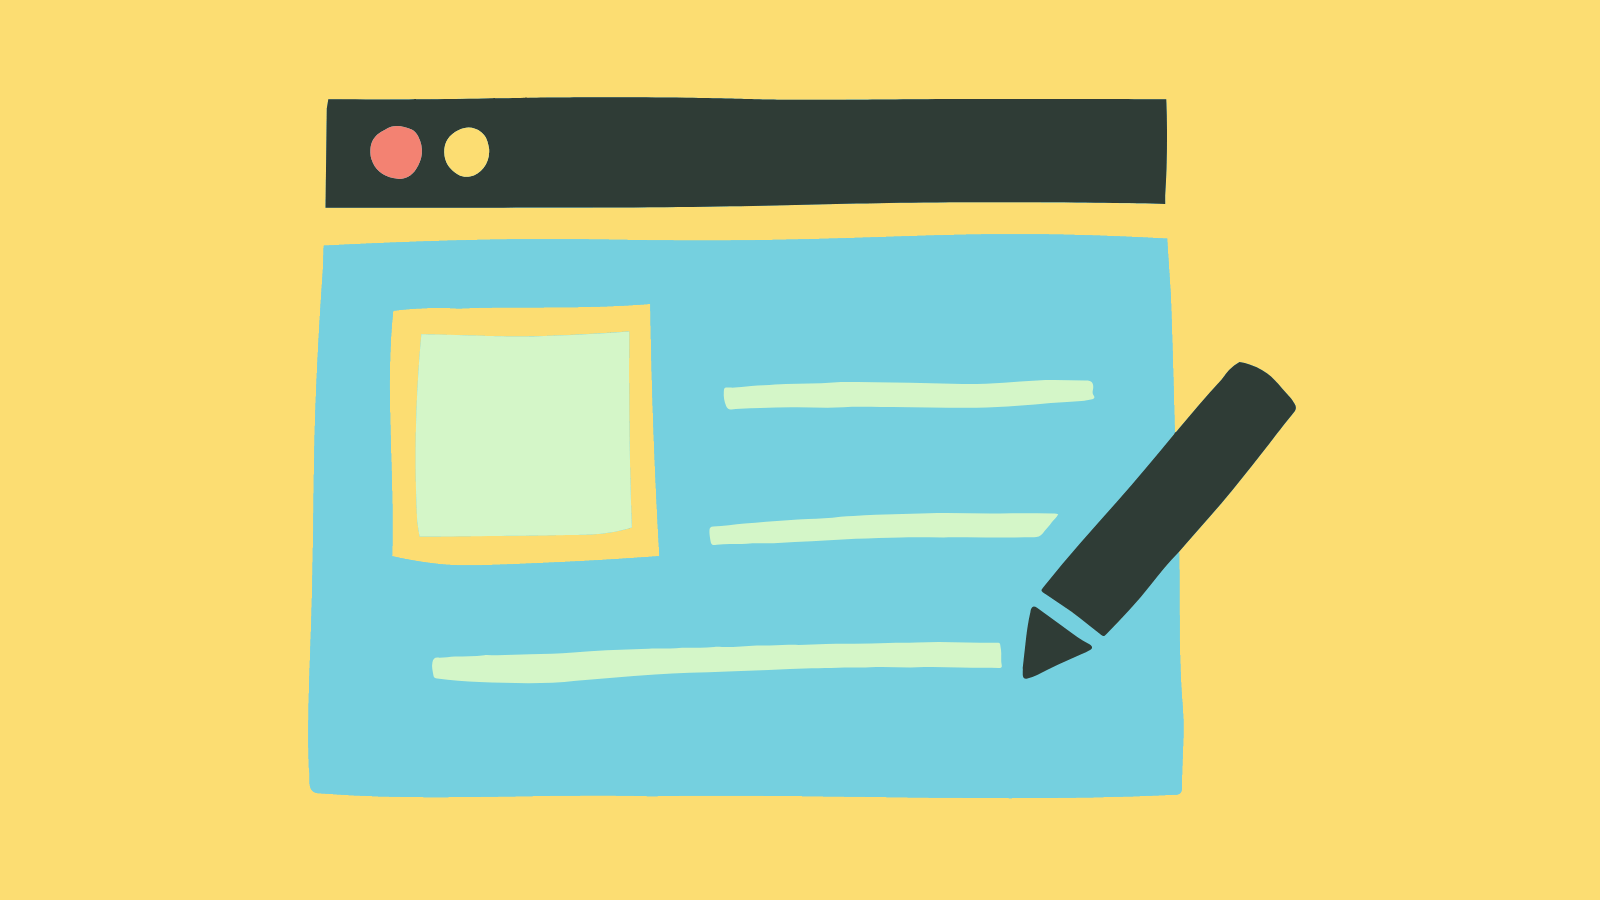 A minimalist graphic of a web page and a pencil (1)